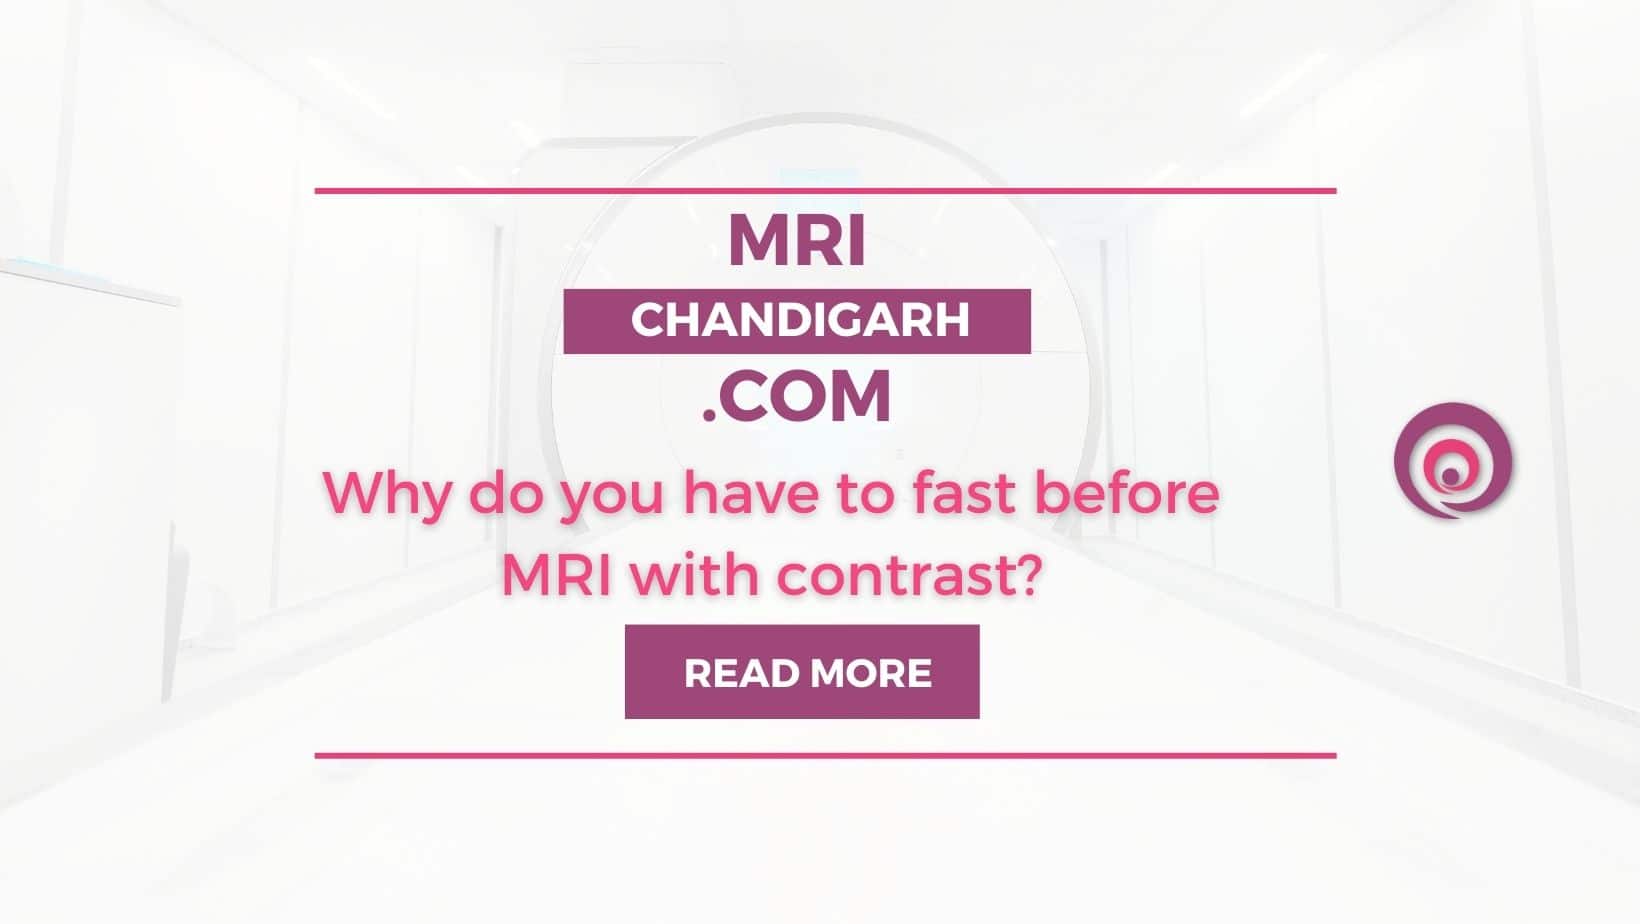 Why do you have to fast before MRI with contrast?